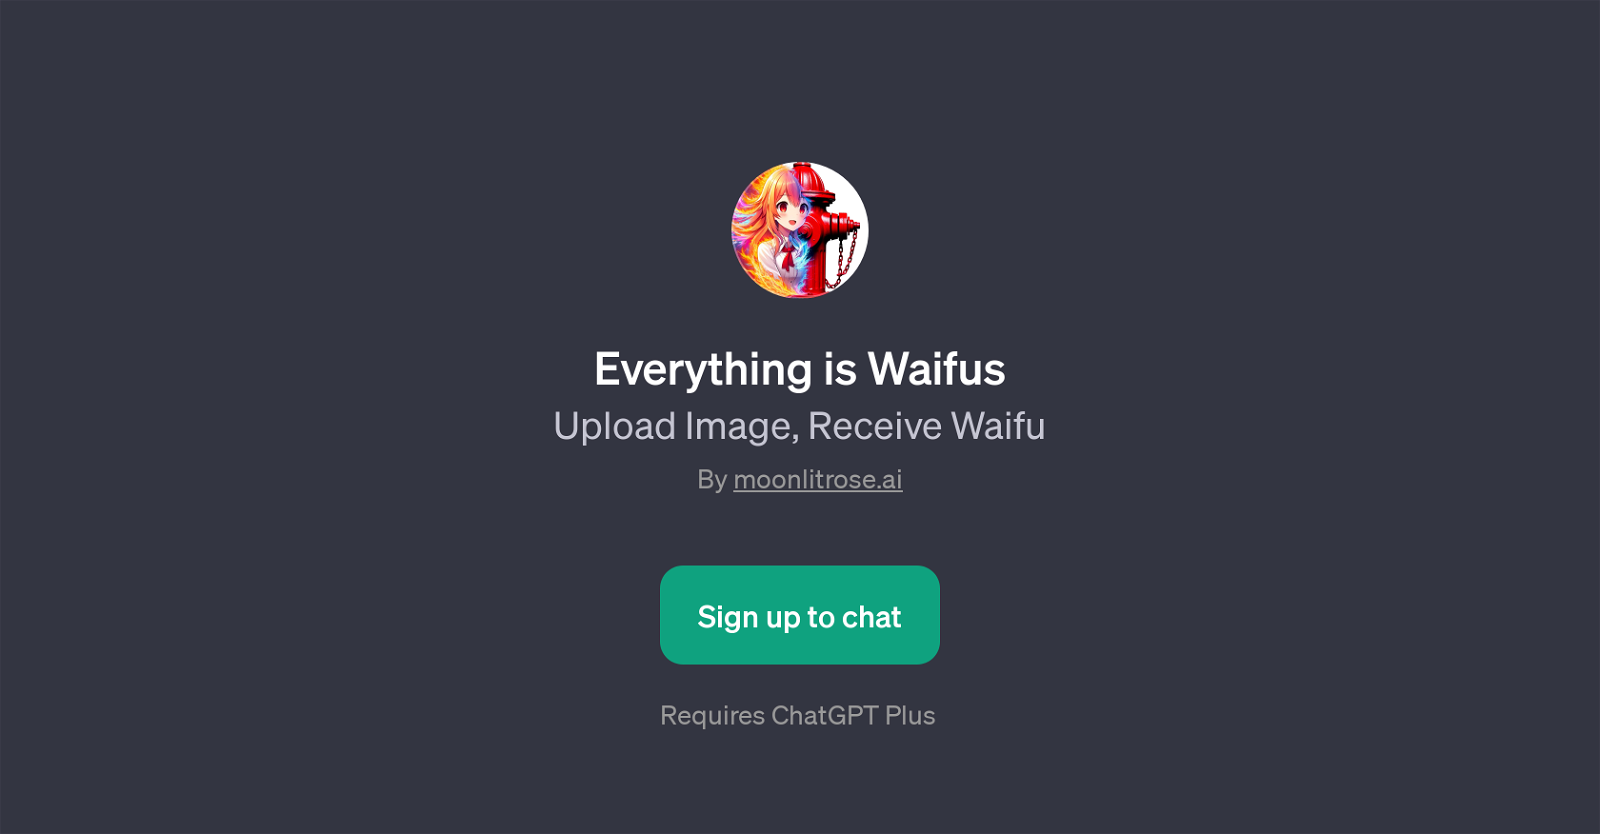 Everything is Waifus website